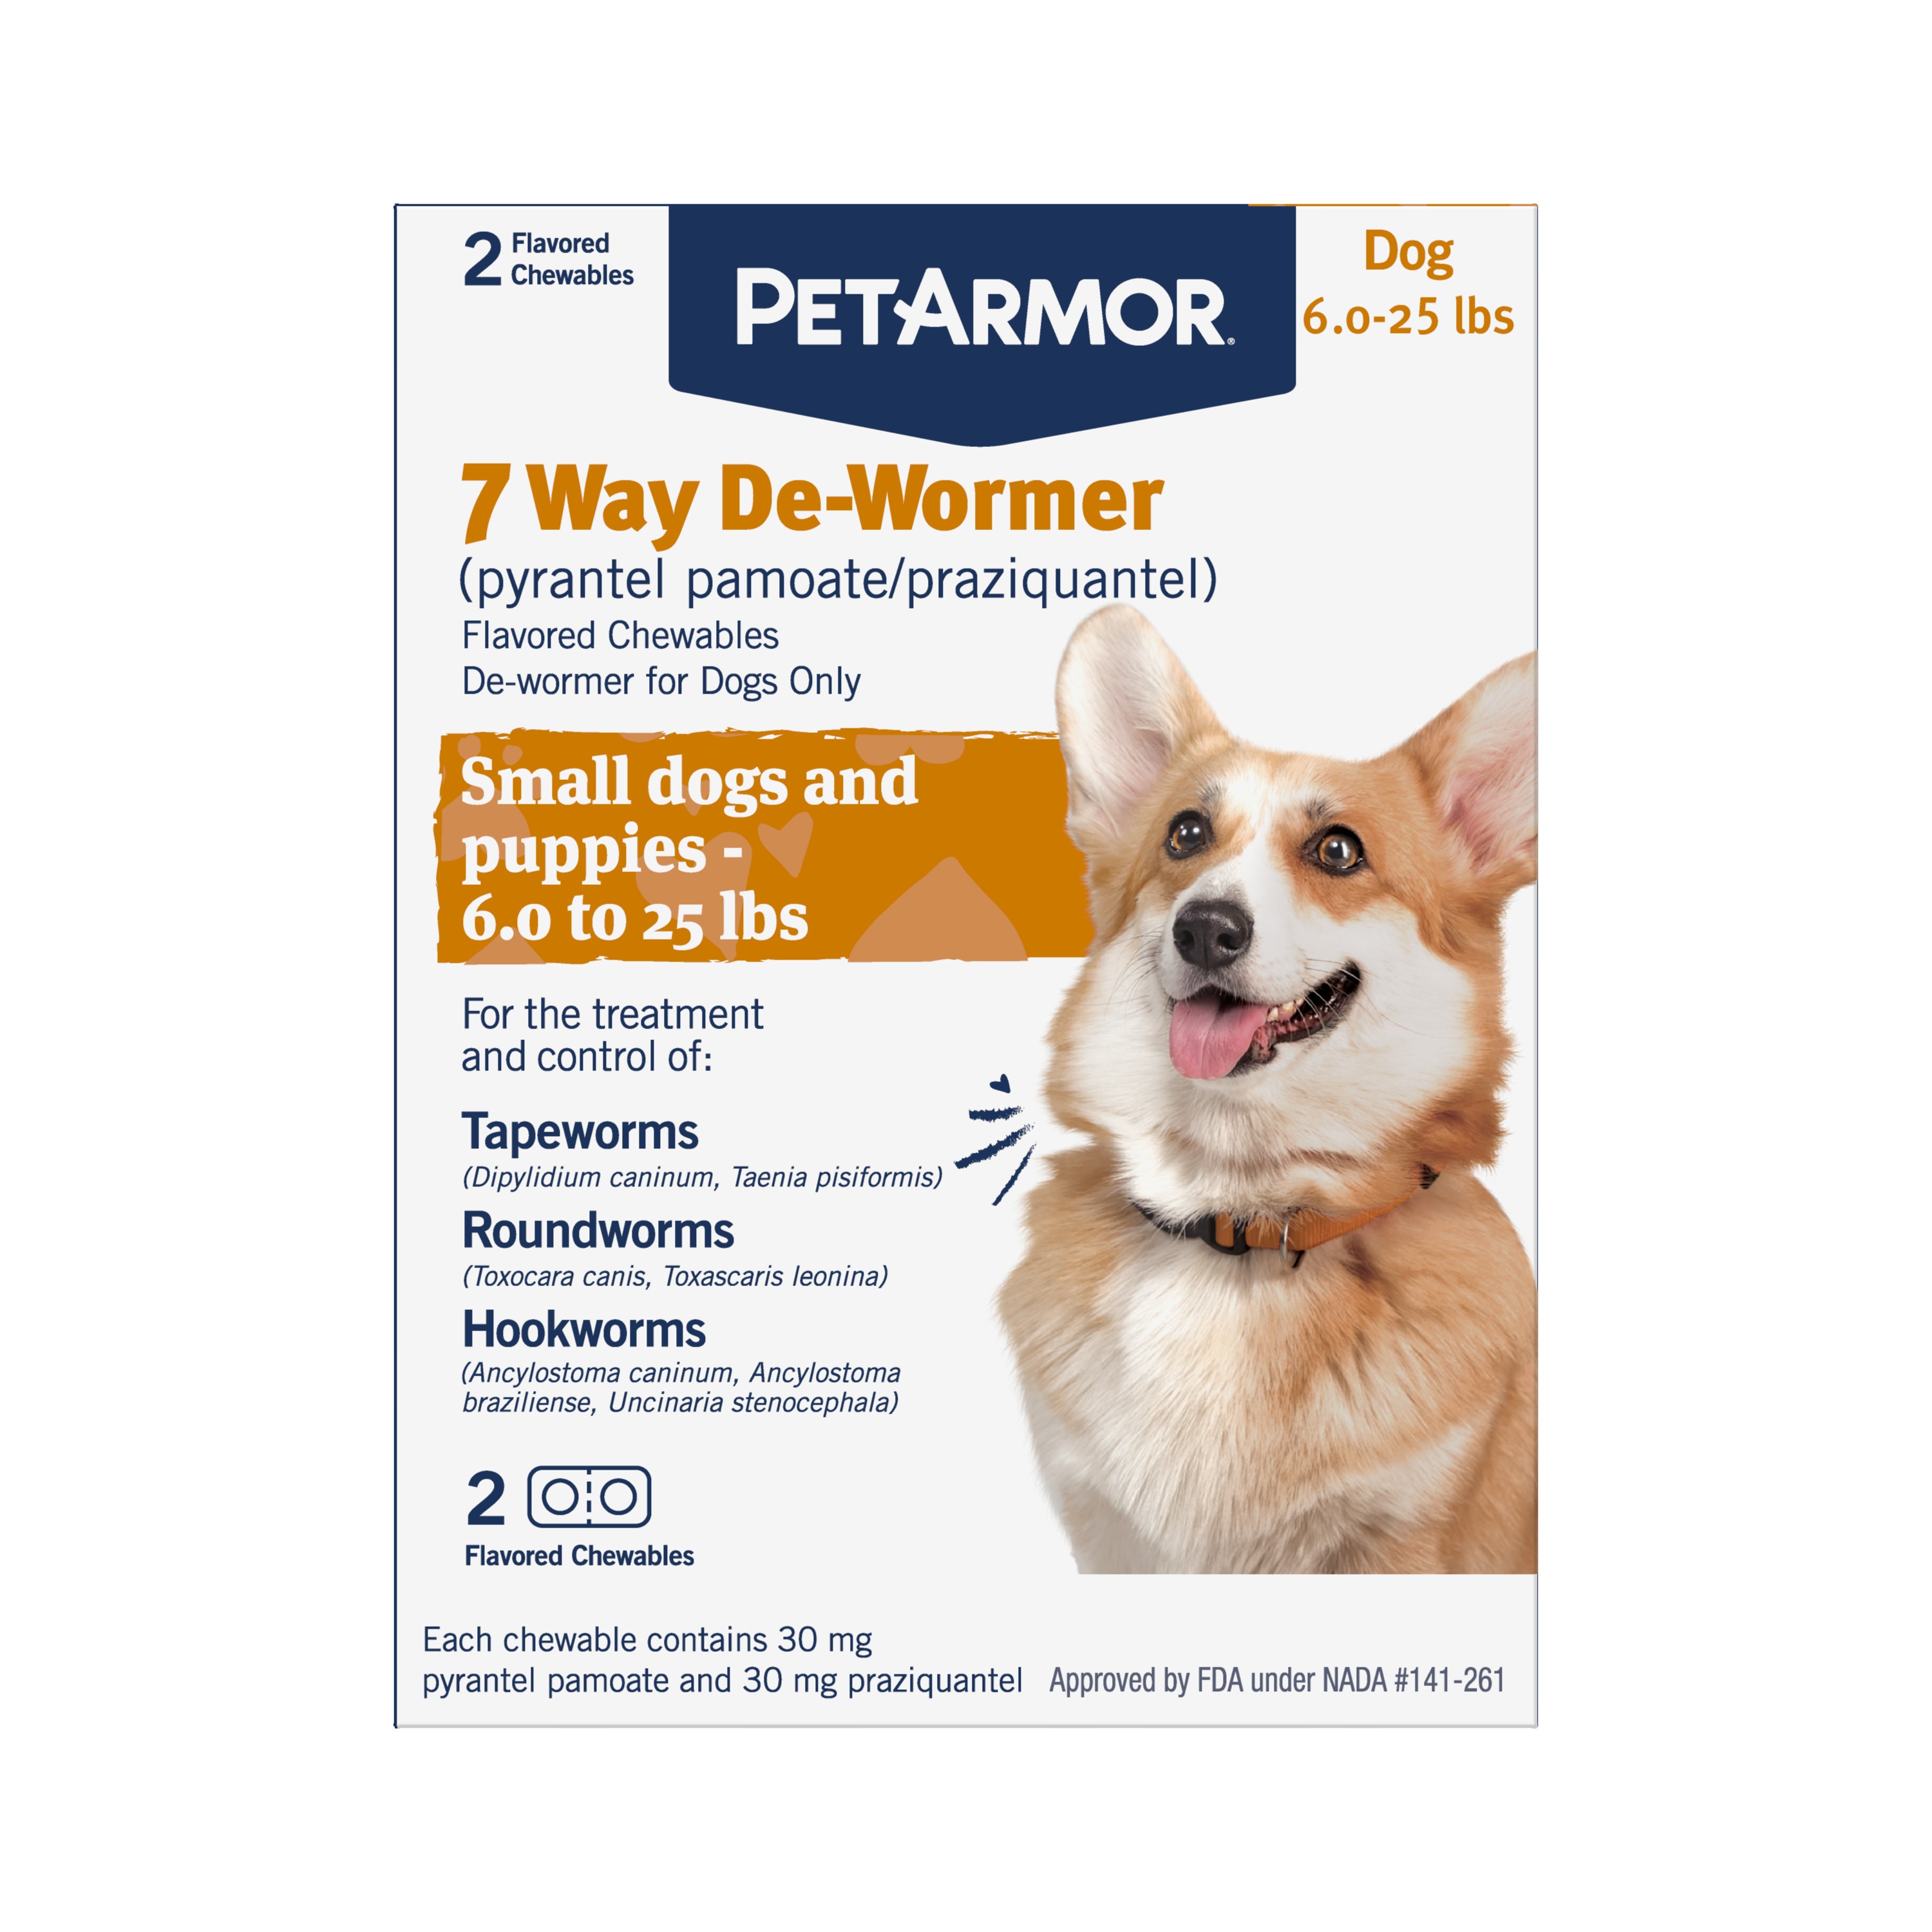 7 Way De-Wormer Dog Sm 2Ct | Chewable Tablets for Skin & Coat Health | Treats Tapeworms, Roundworms, Hookworms | For Dogs 6-25lbs | - PetArmor 05262